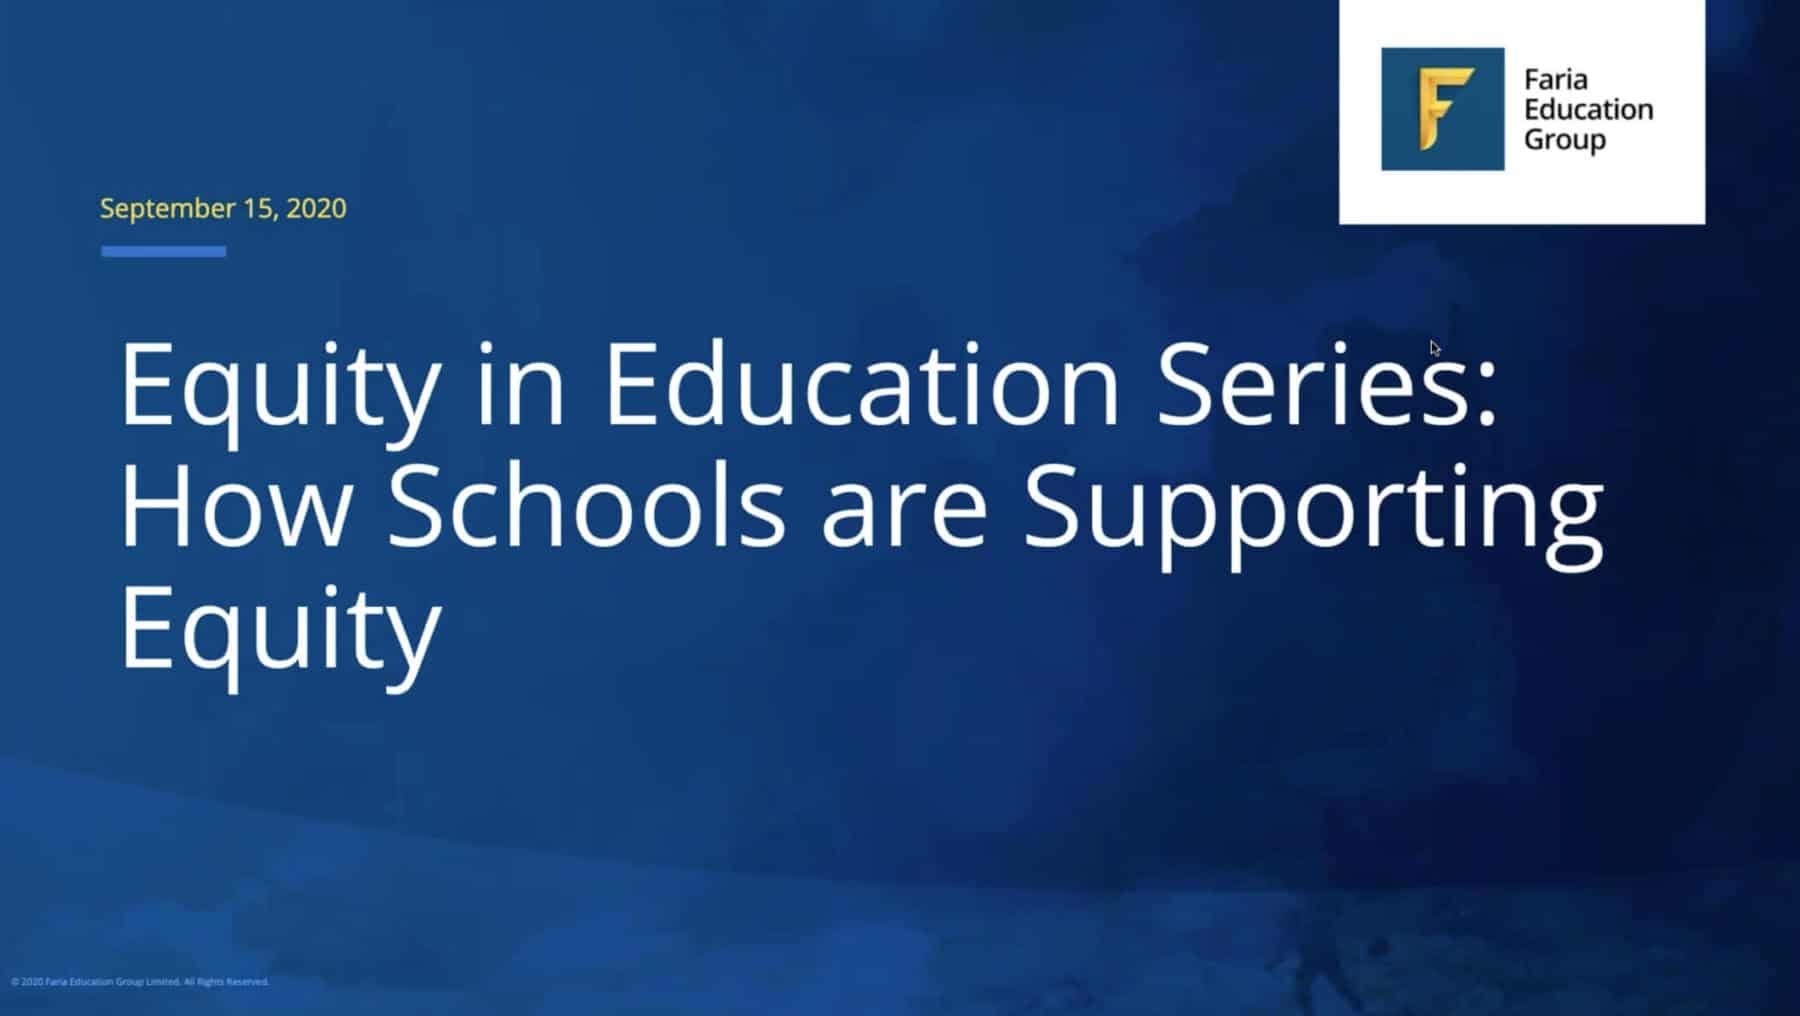 Equity in Education Series: How Schools are Supporting Equity